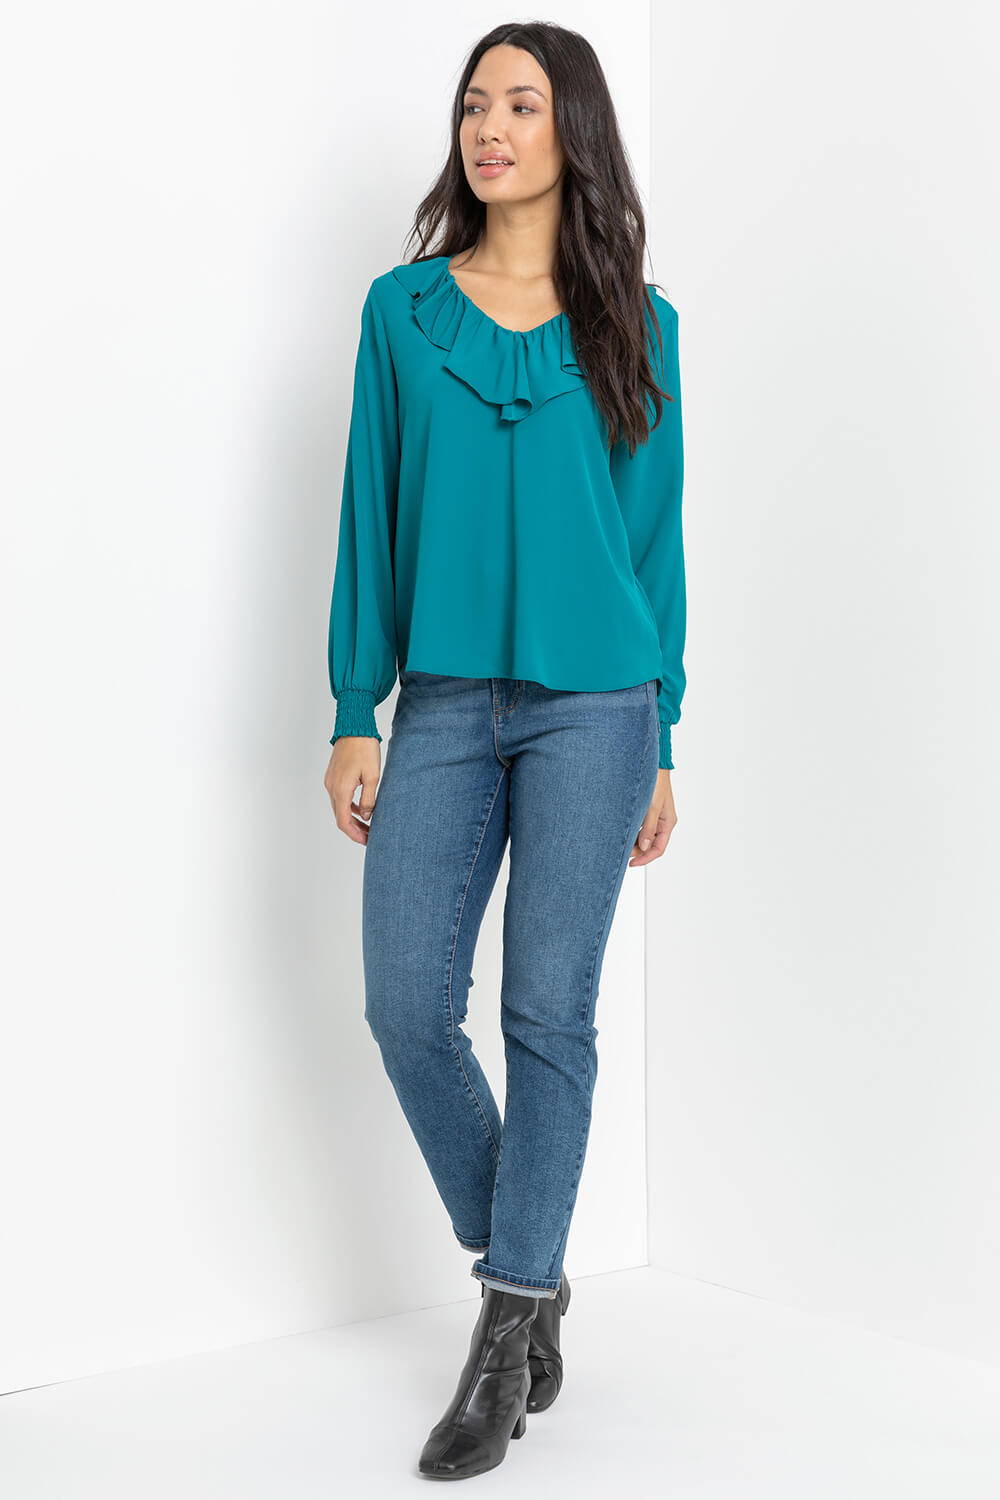 Teal Chiffon Frill Neck Detail Top, Image 3 of 4